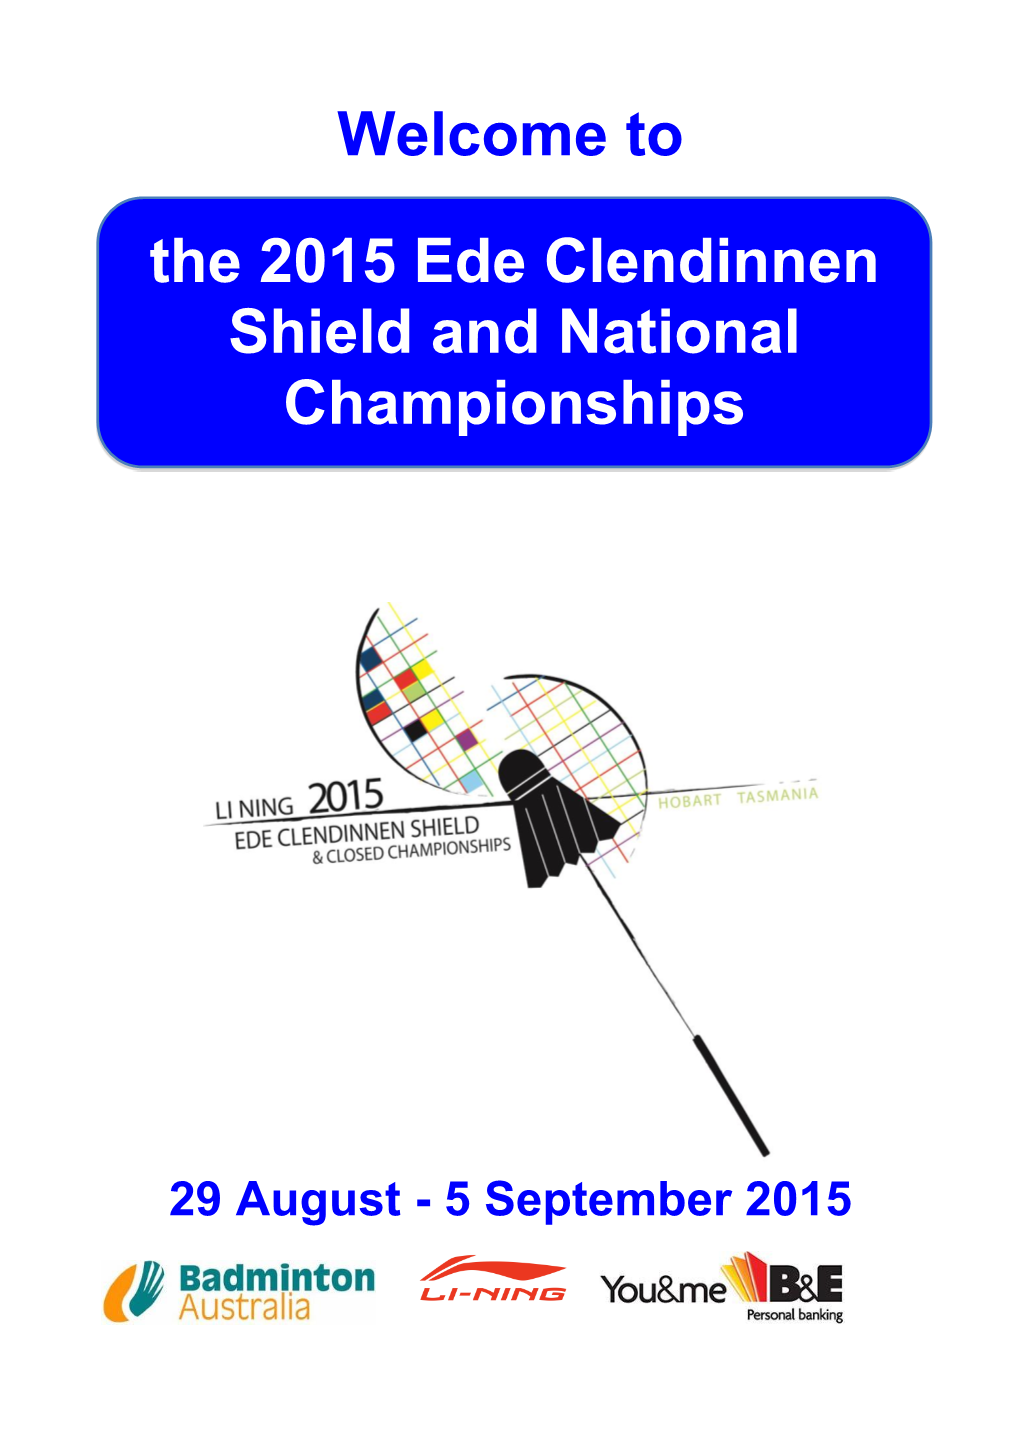 Welcome to the 2015 Ede Clendinnen Shield and National Championships